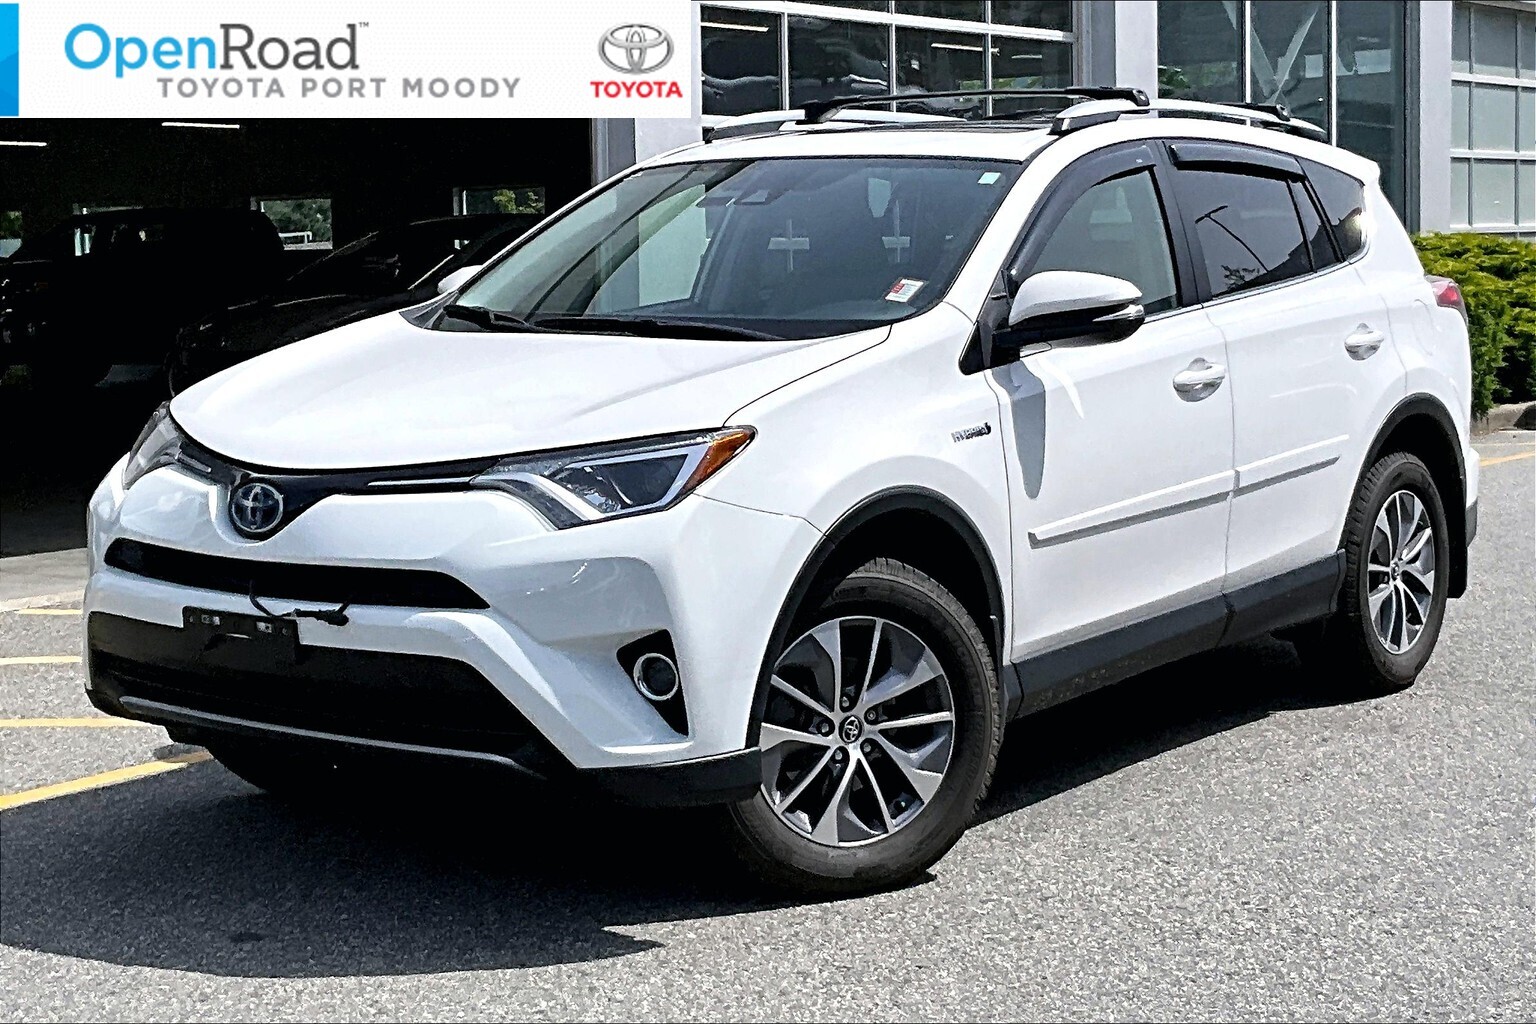 2017 Toyota RAV4 Hybrid LE+ |OpenRoad True Price |Local |One Owner |No Cla